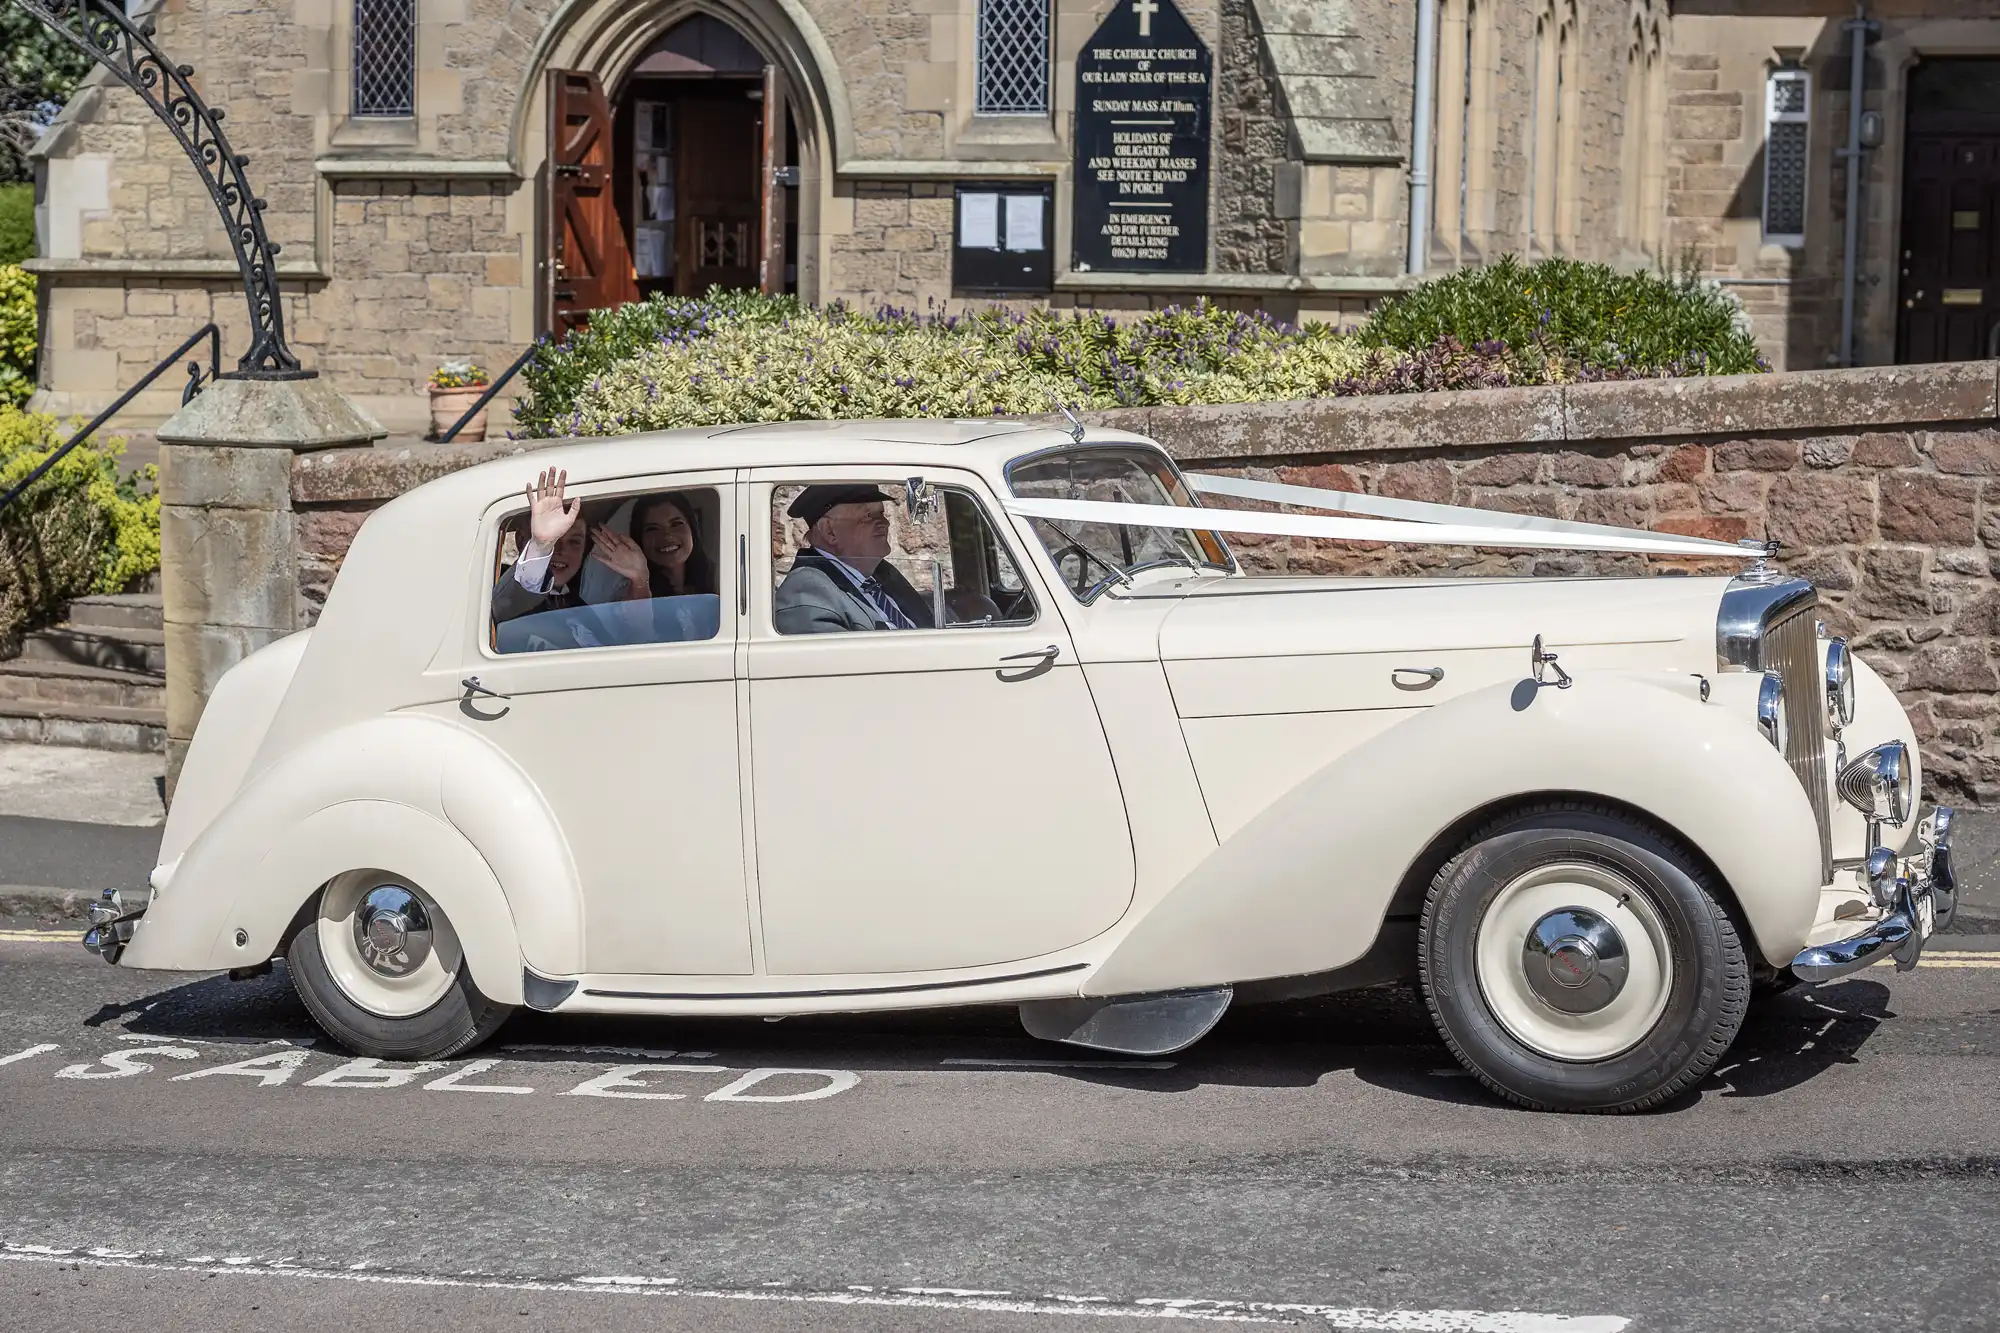 A vintage white wedding car driving down the street with a couple waving from the back seat.